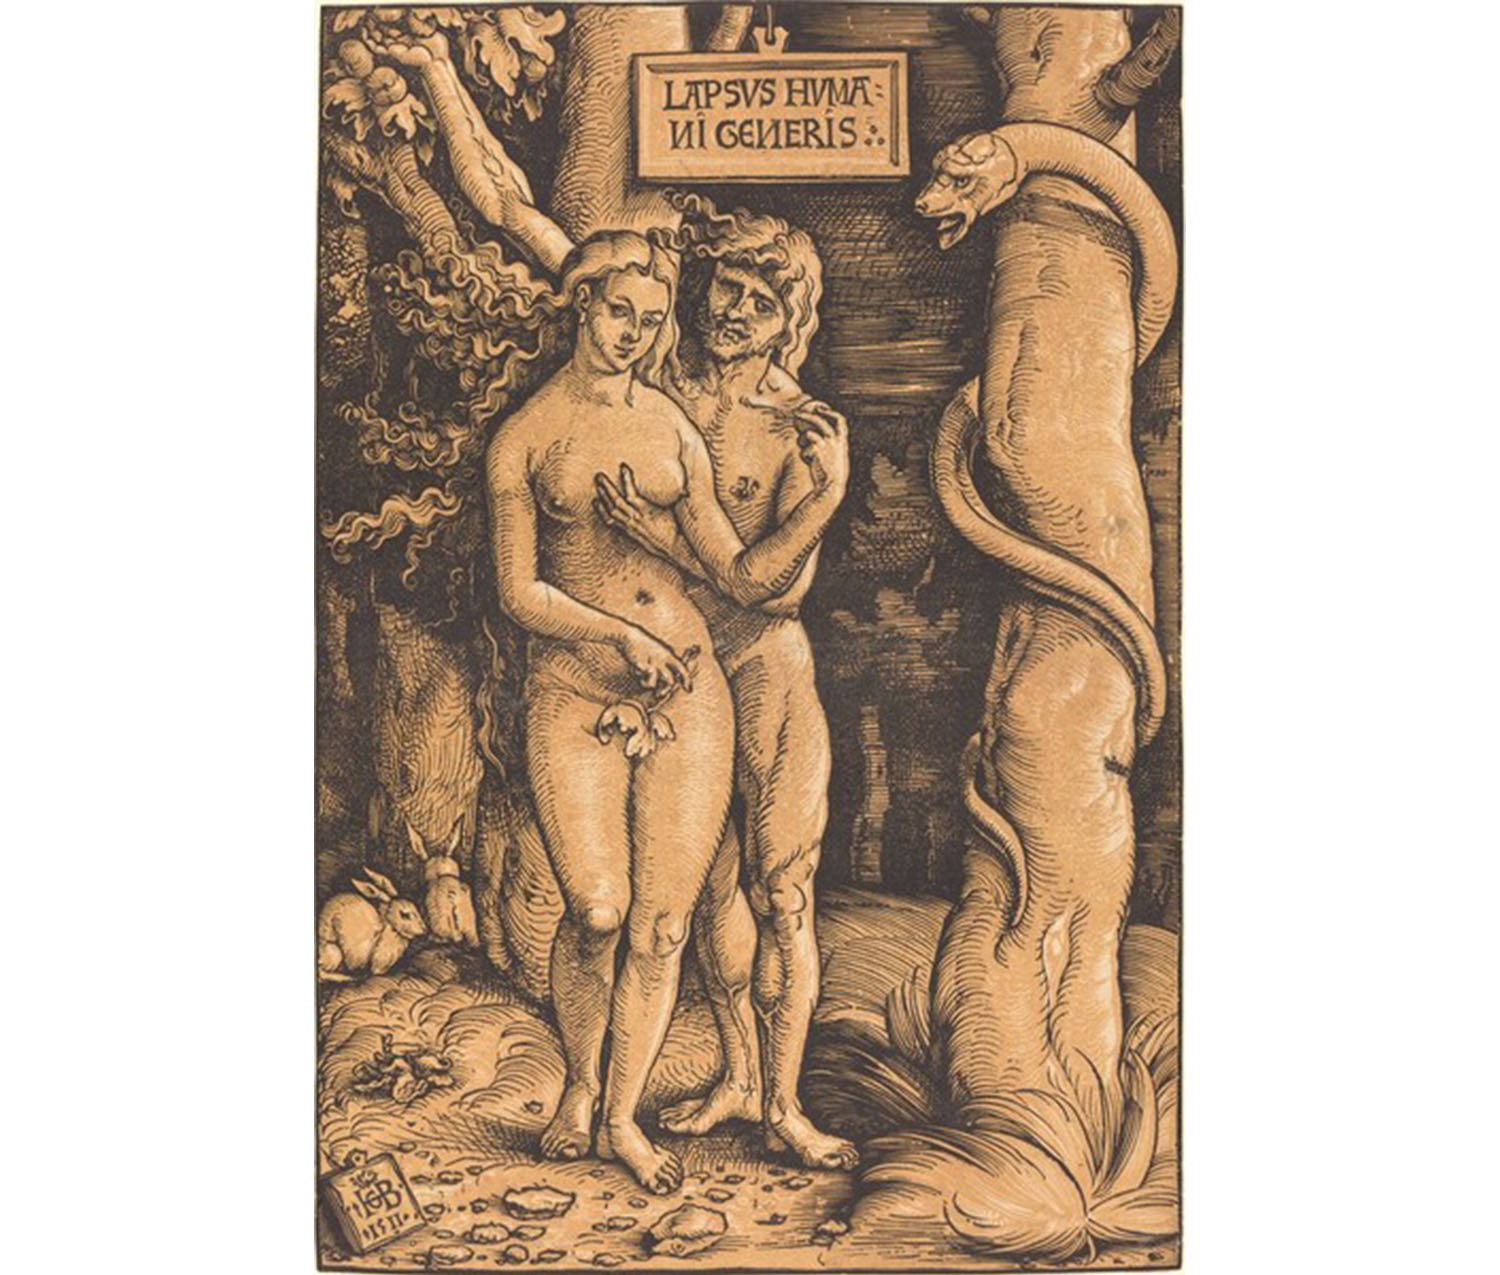 adam and eve standing in front of trees, embracing one another